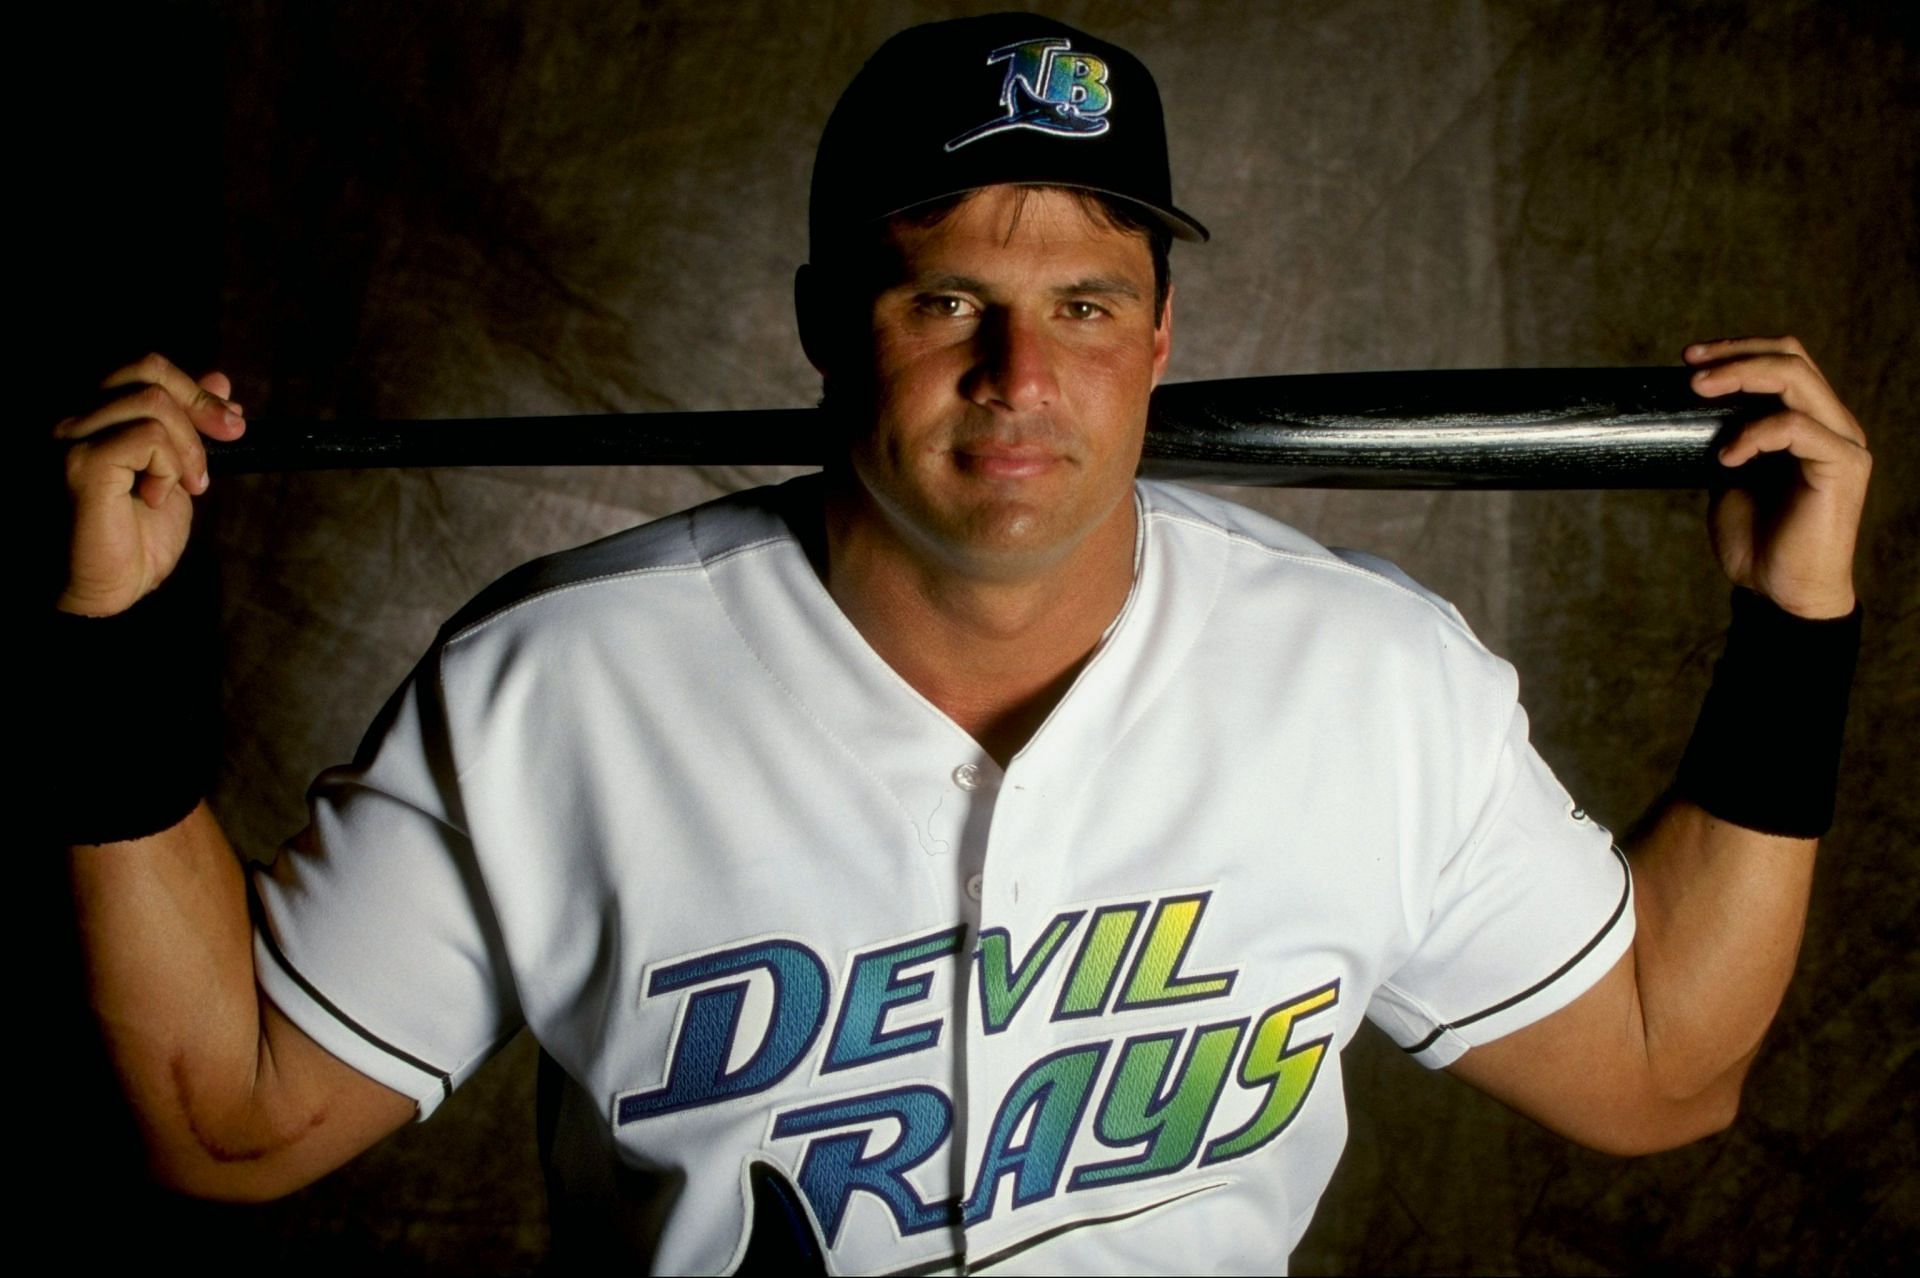 Jose Canseco's model daughter claims ex-MLB star 'blew all the family  money' and she had to 'work my a** off